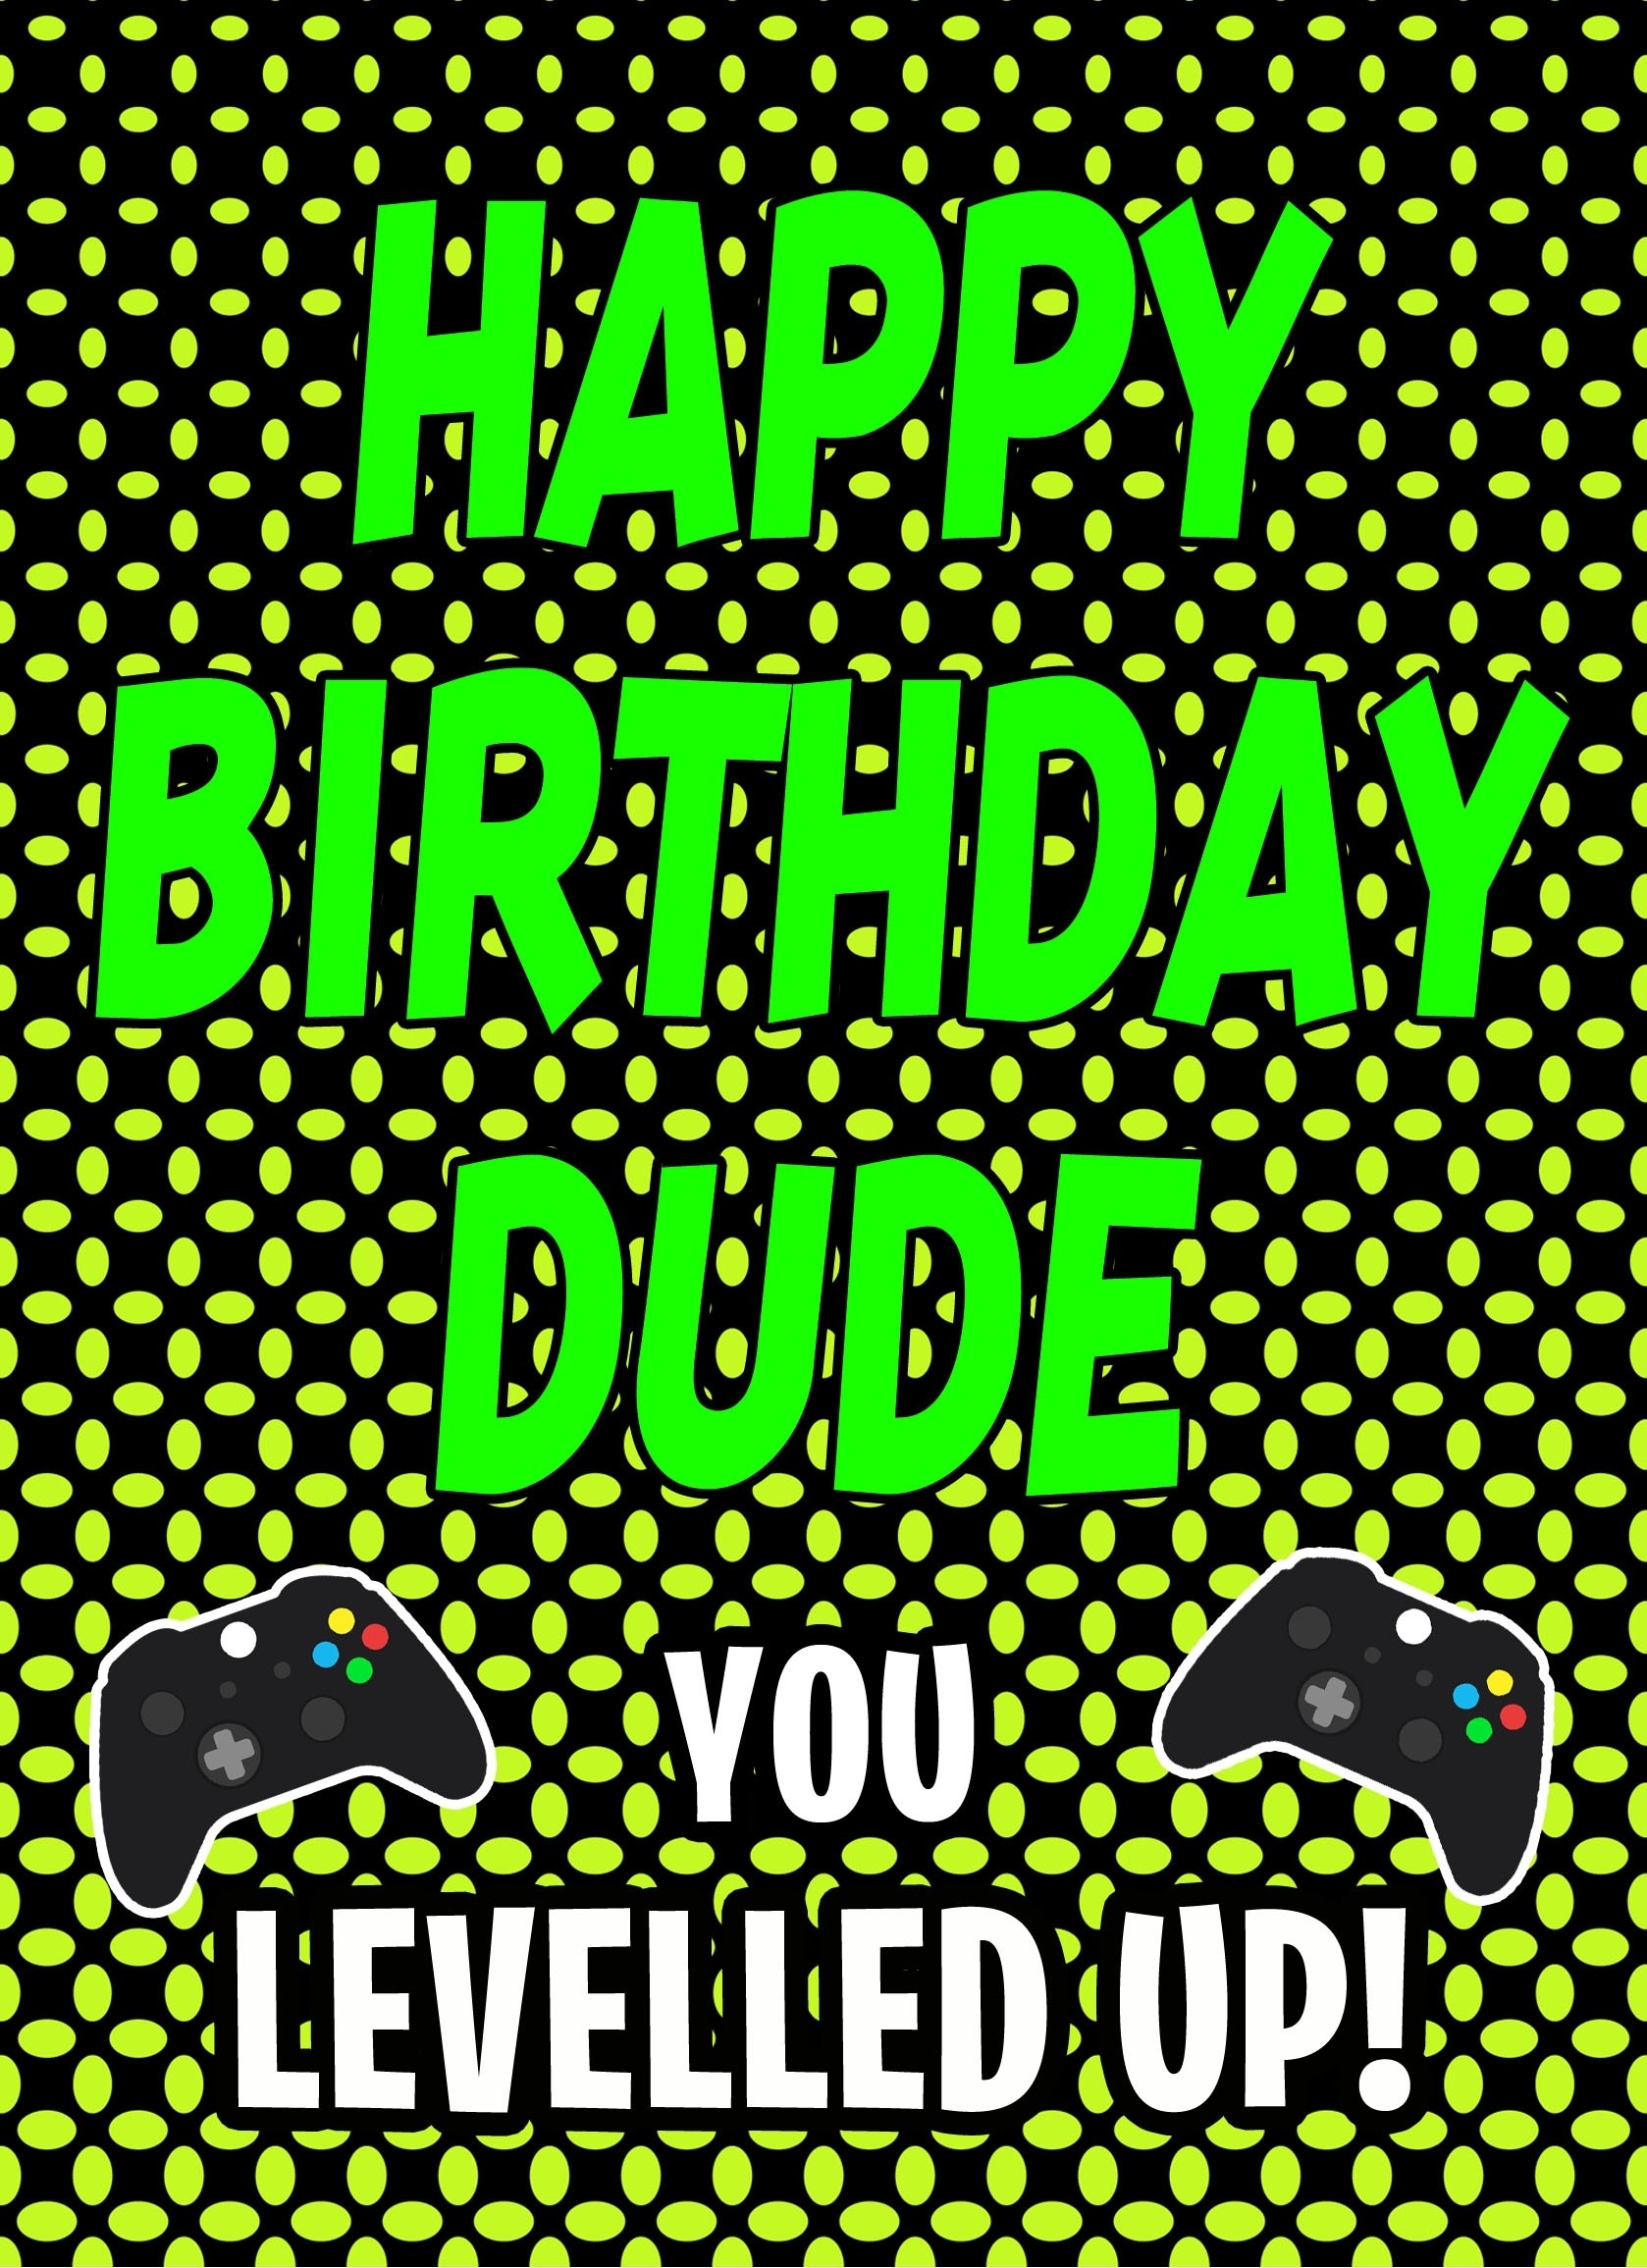 Gamer Birthday Card For Dude (Levelled Up)